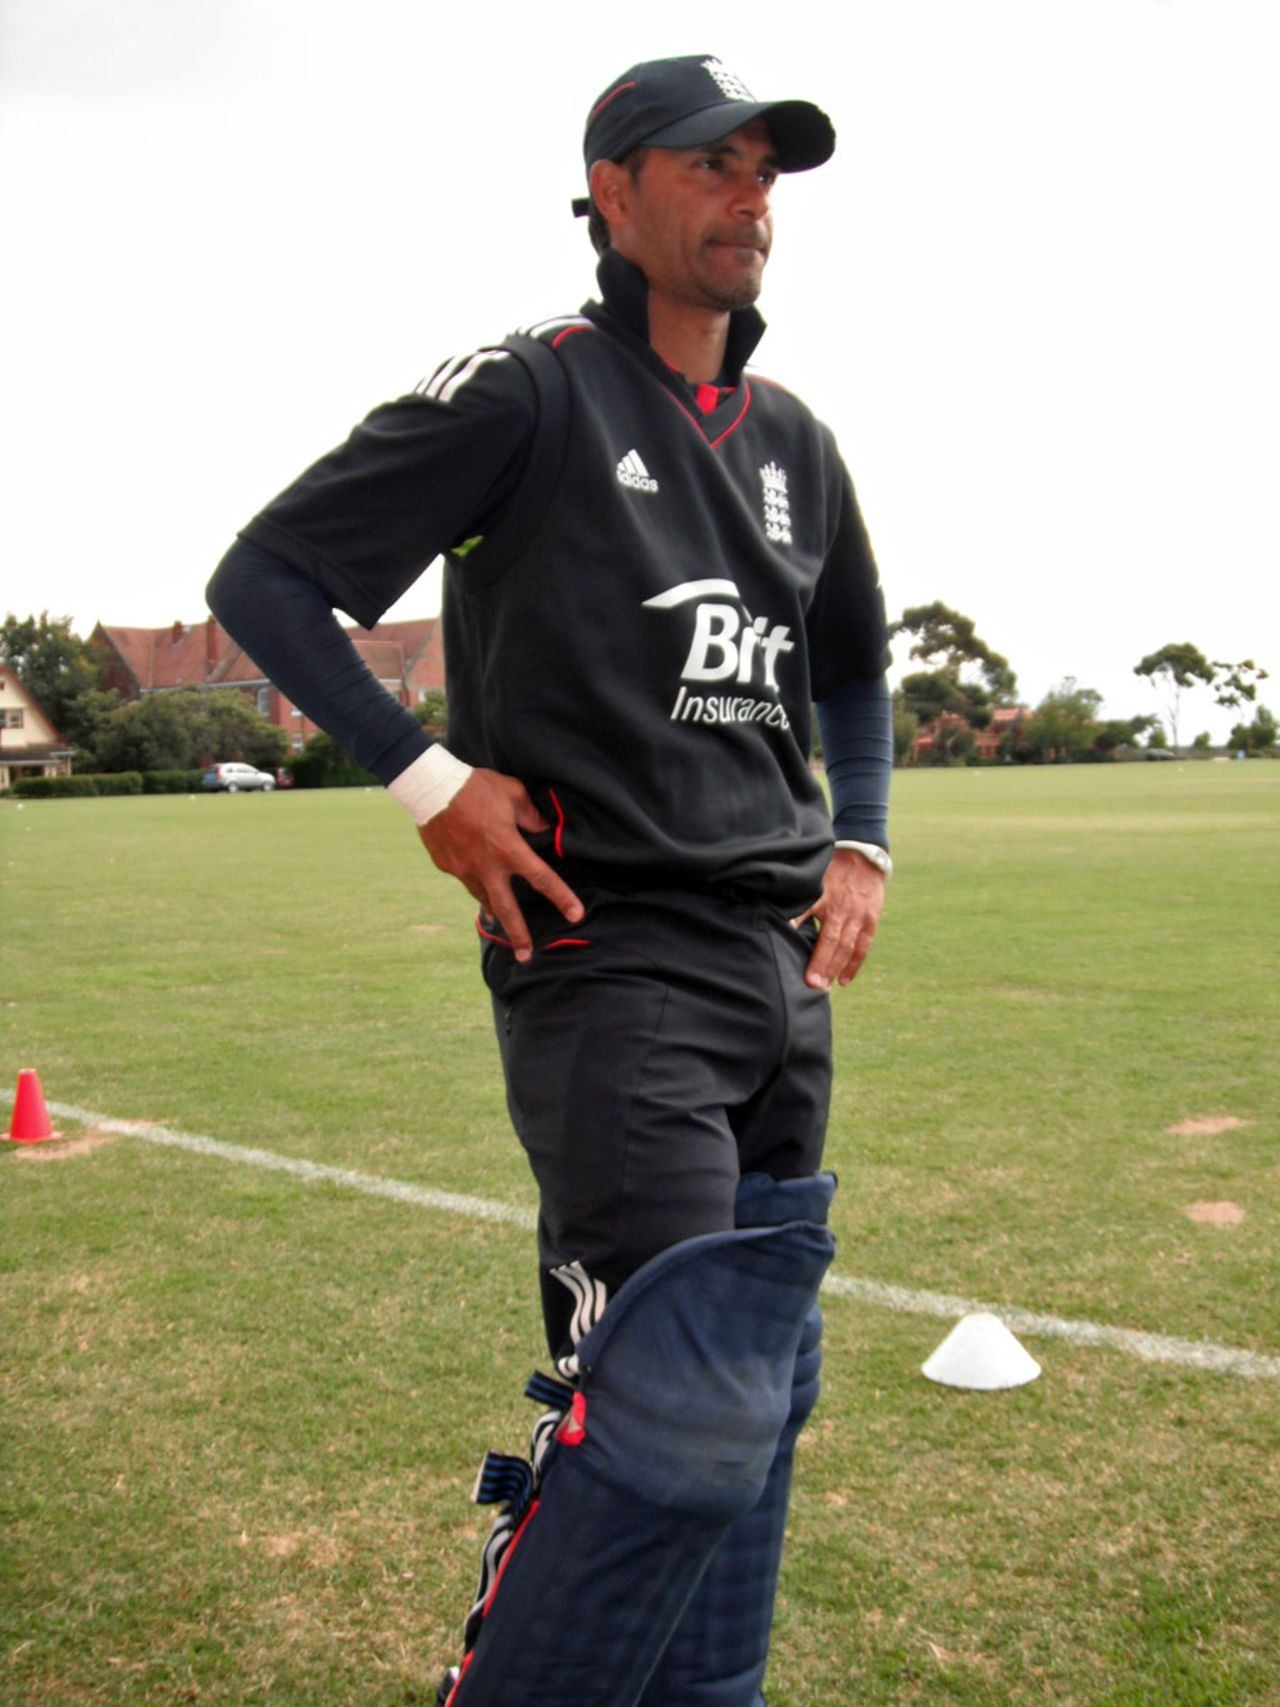 Umesh Valjee in his England gear